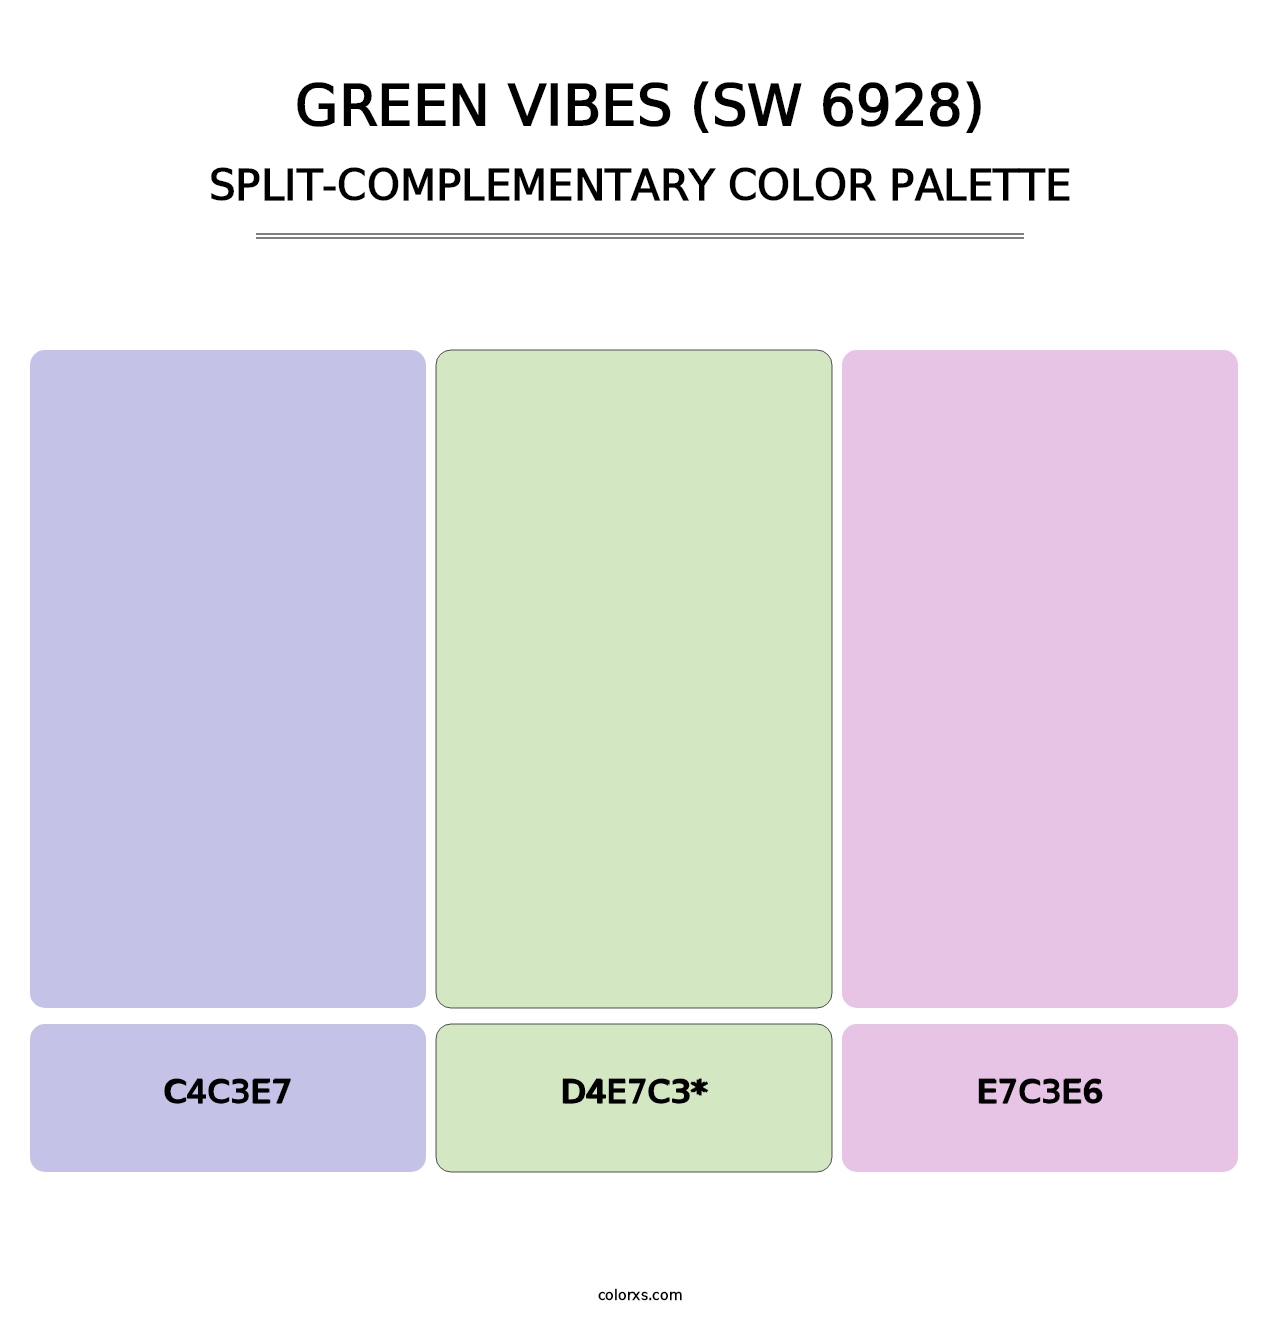 Green Vibes (SW 6928) - Split-Complementary Color Palette